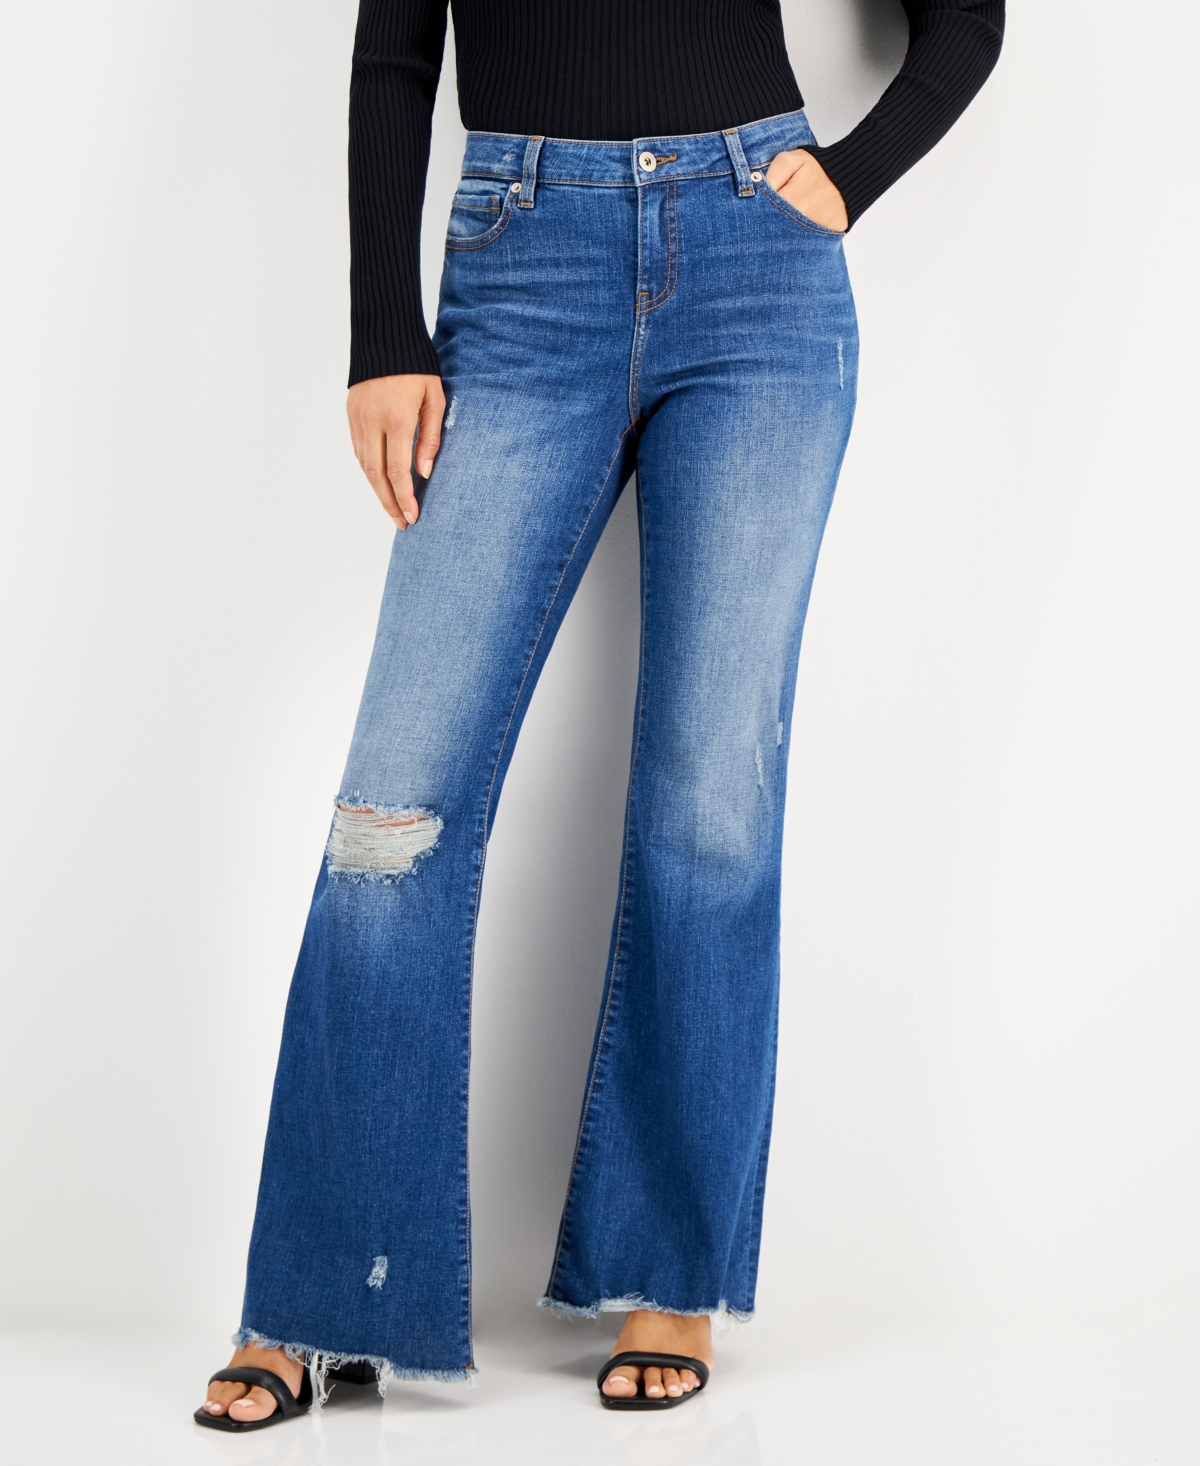  Inc International Concepts Women's Ripped Flare-Leg Jeans, Created for Macy's